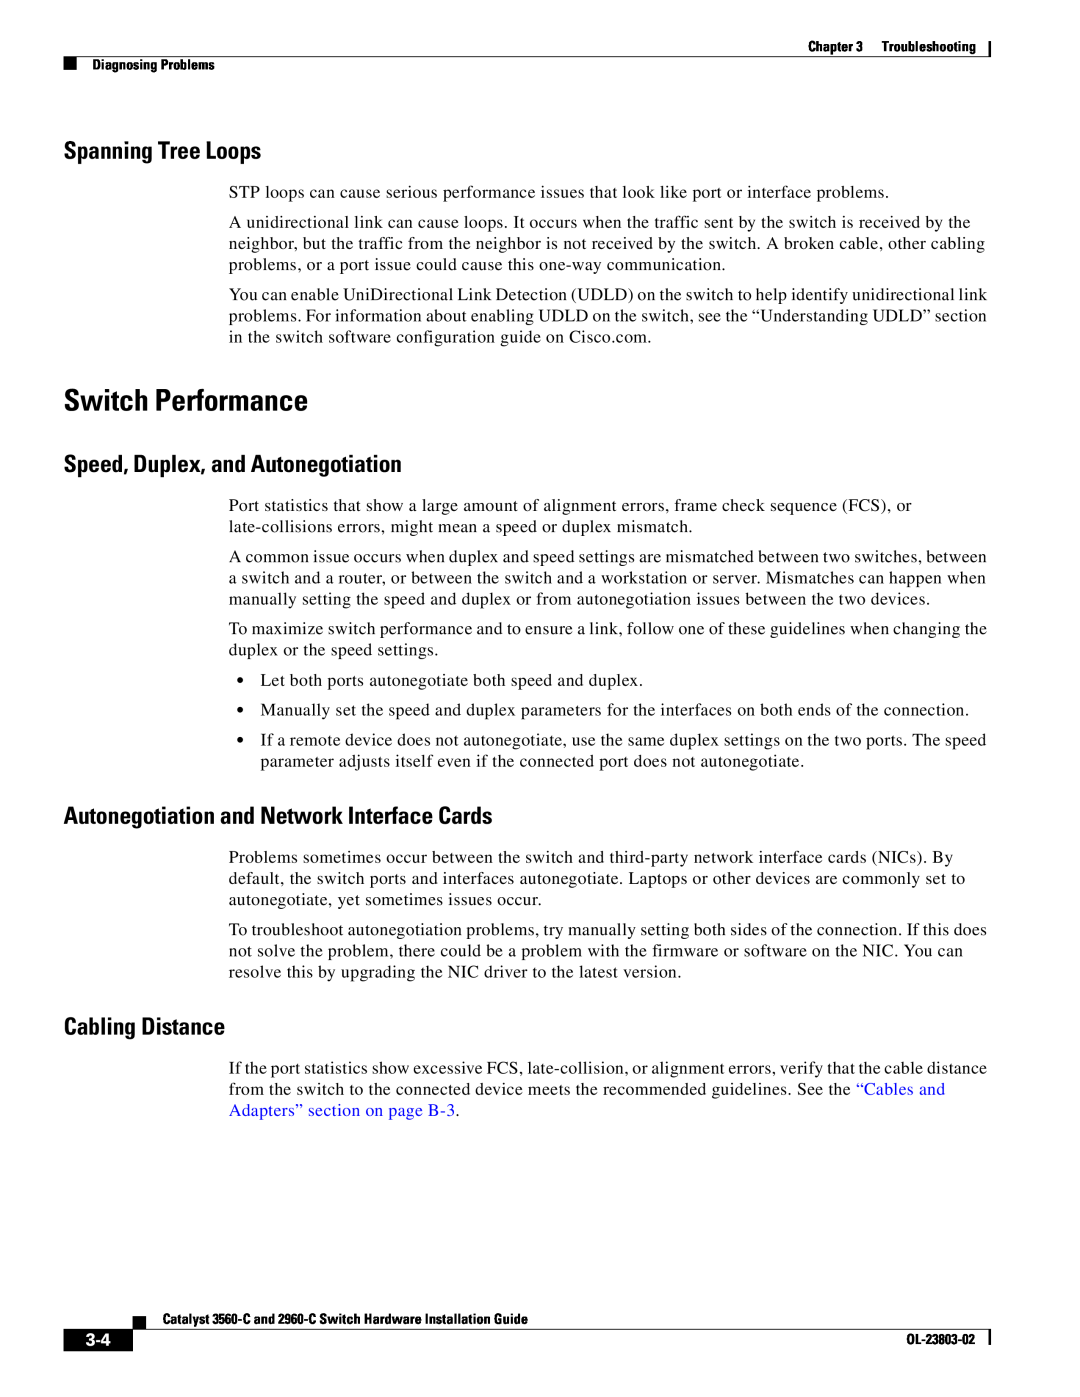 Cisco Systems 3560-C manual Switch Performance, Spanning Tree Loops, Speed, Duplex, and Autonegotiation, Cabling Distance 